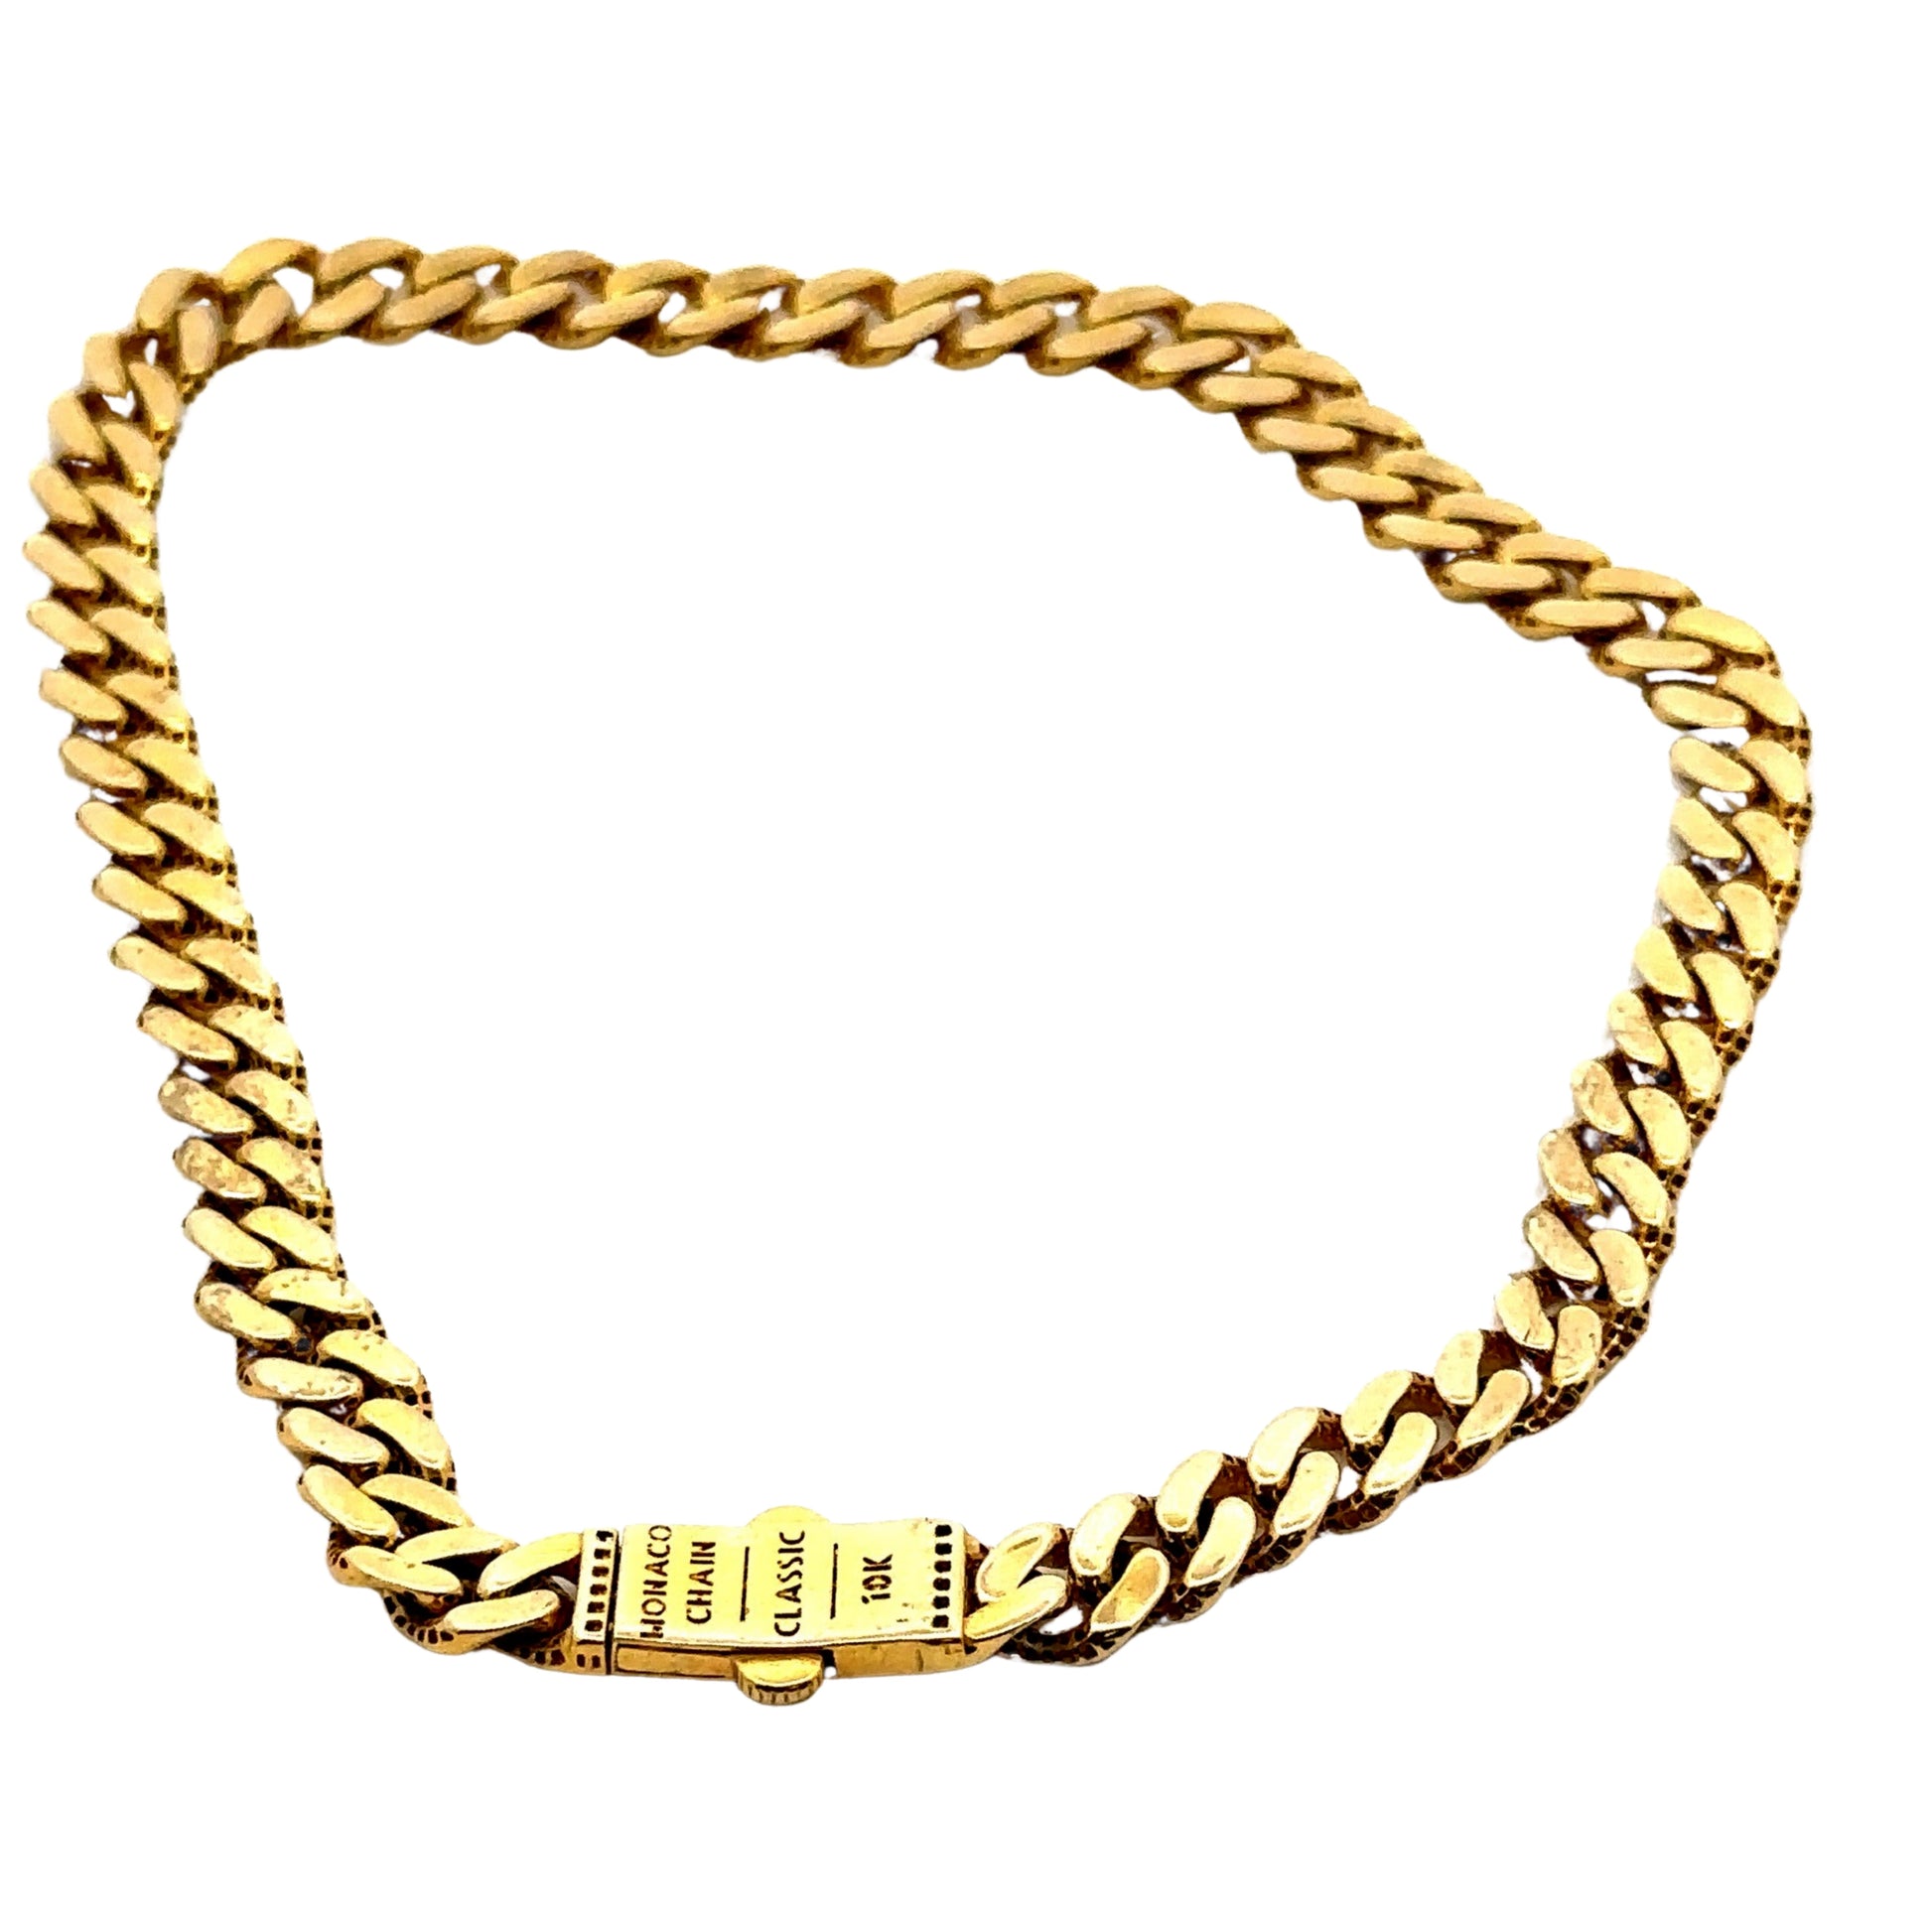 back of link anklet with 10K monaco chain classic stamped on clasp.